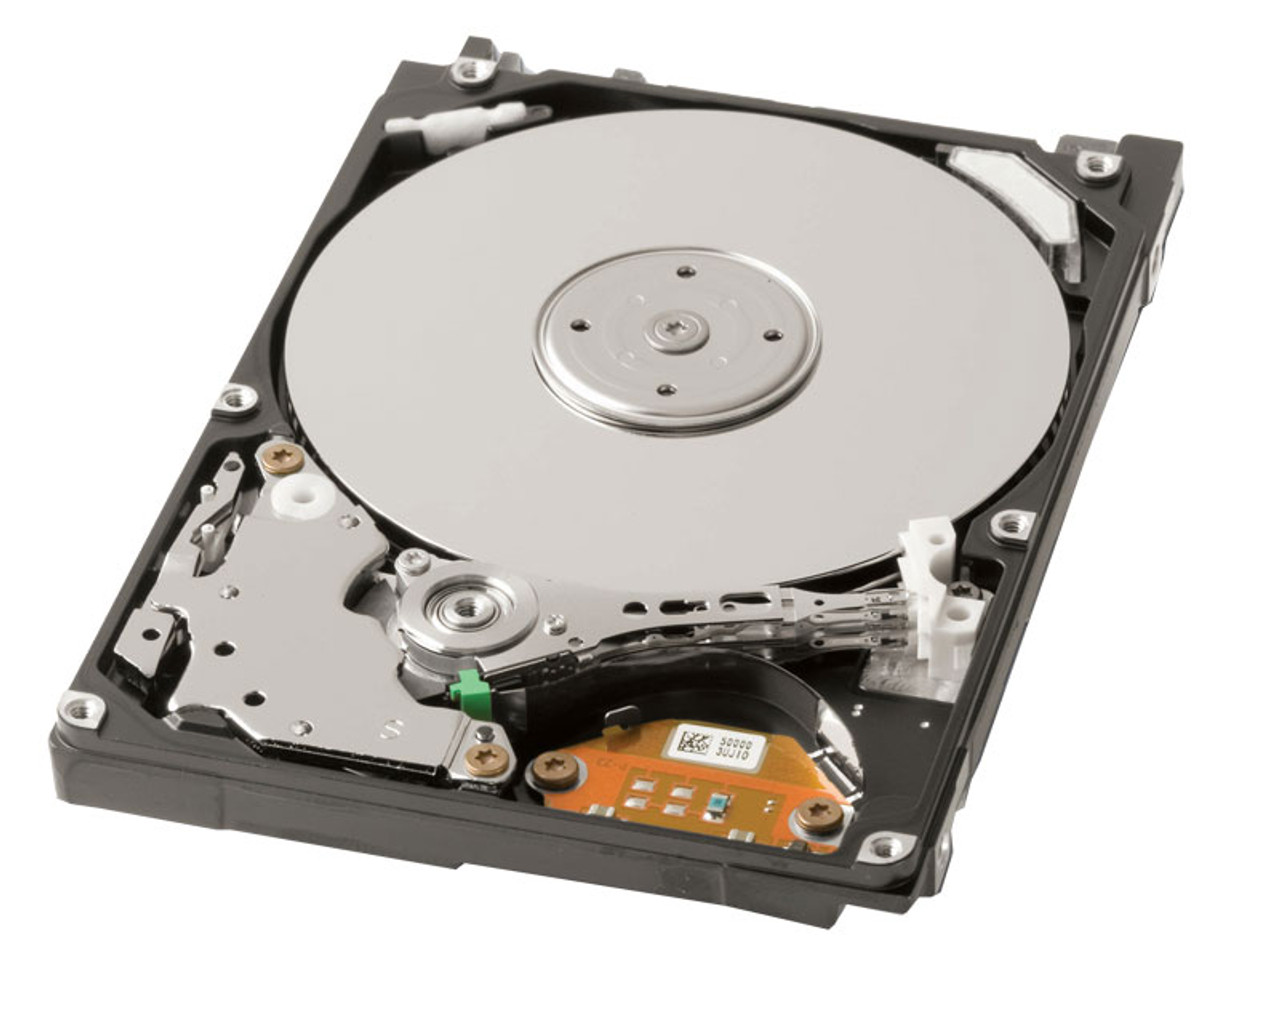 N1105-U Dell 73GB 10000RPM Ultra-320 SCSI 80-Pin Hot Swap 8MB Cache 3.5-inch Internal Hard Drive with Tray